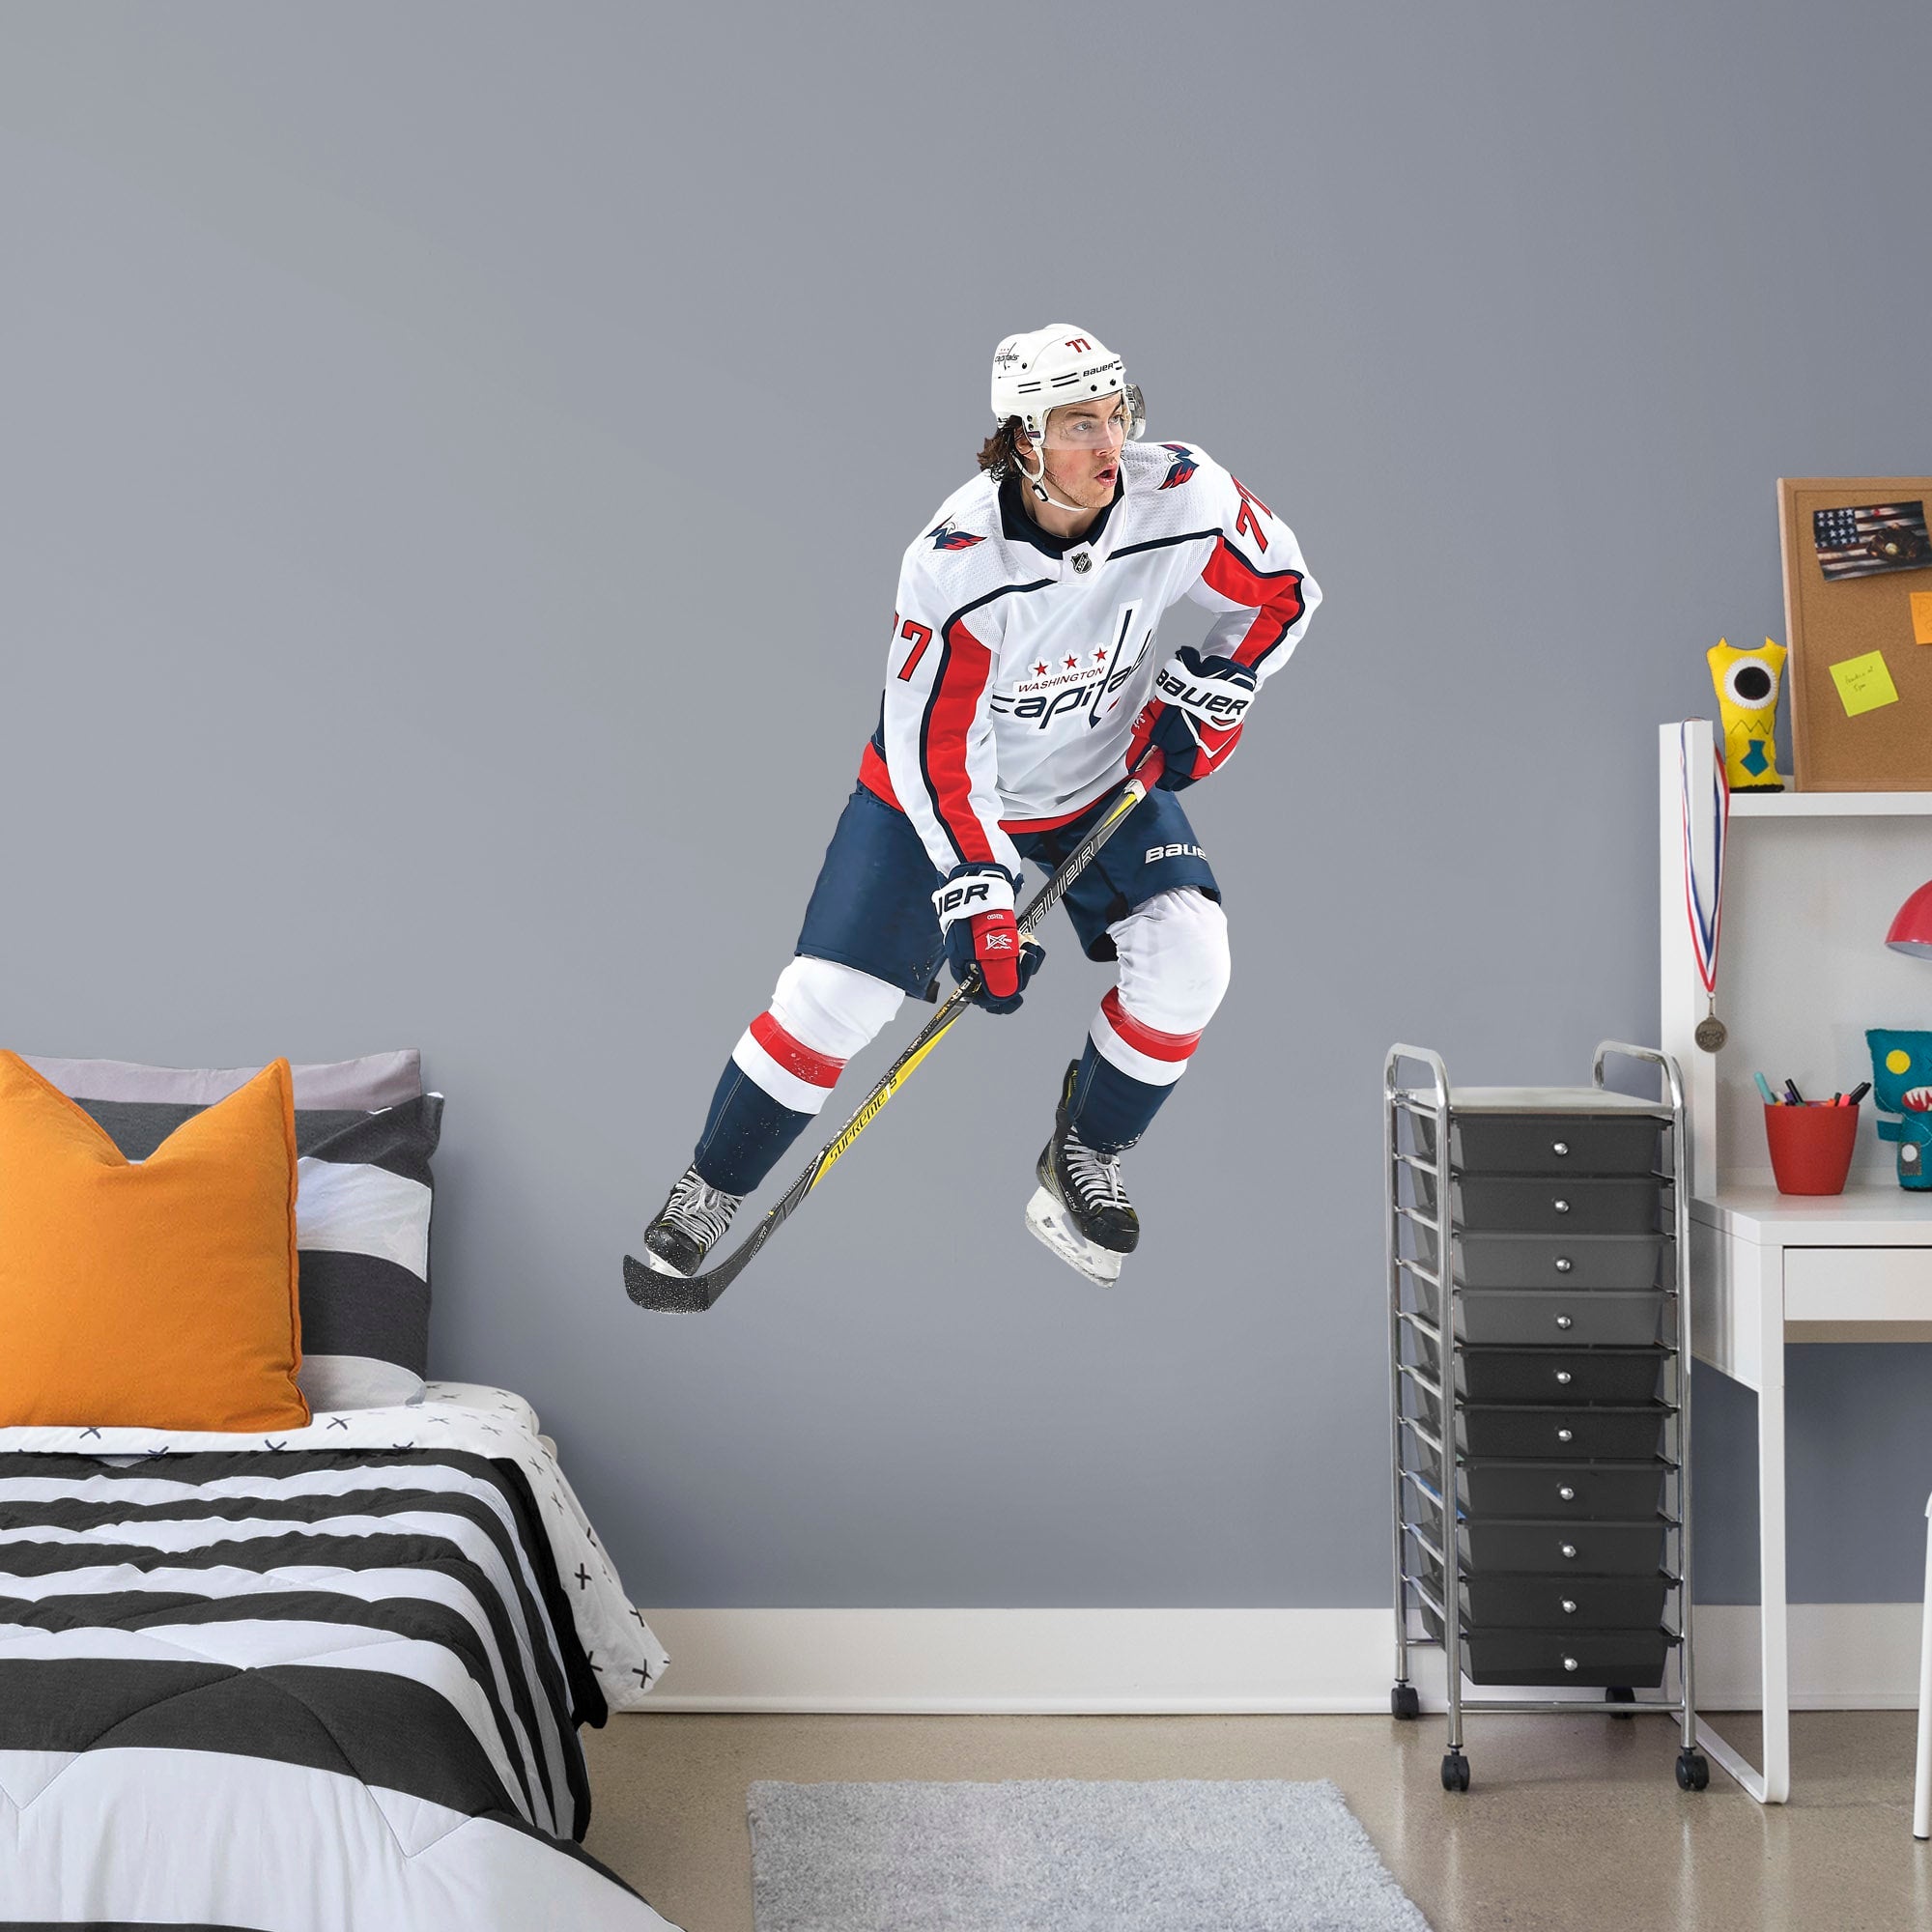 T.J. Oshie for Washington Capitals - Officially Licensed NHL Removable Wall Decal Giant Athlete + 2 Decals (35"W x 50"H) by Fath